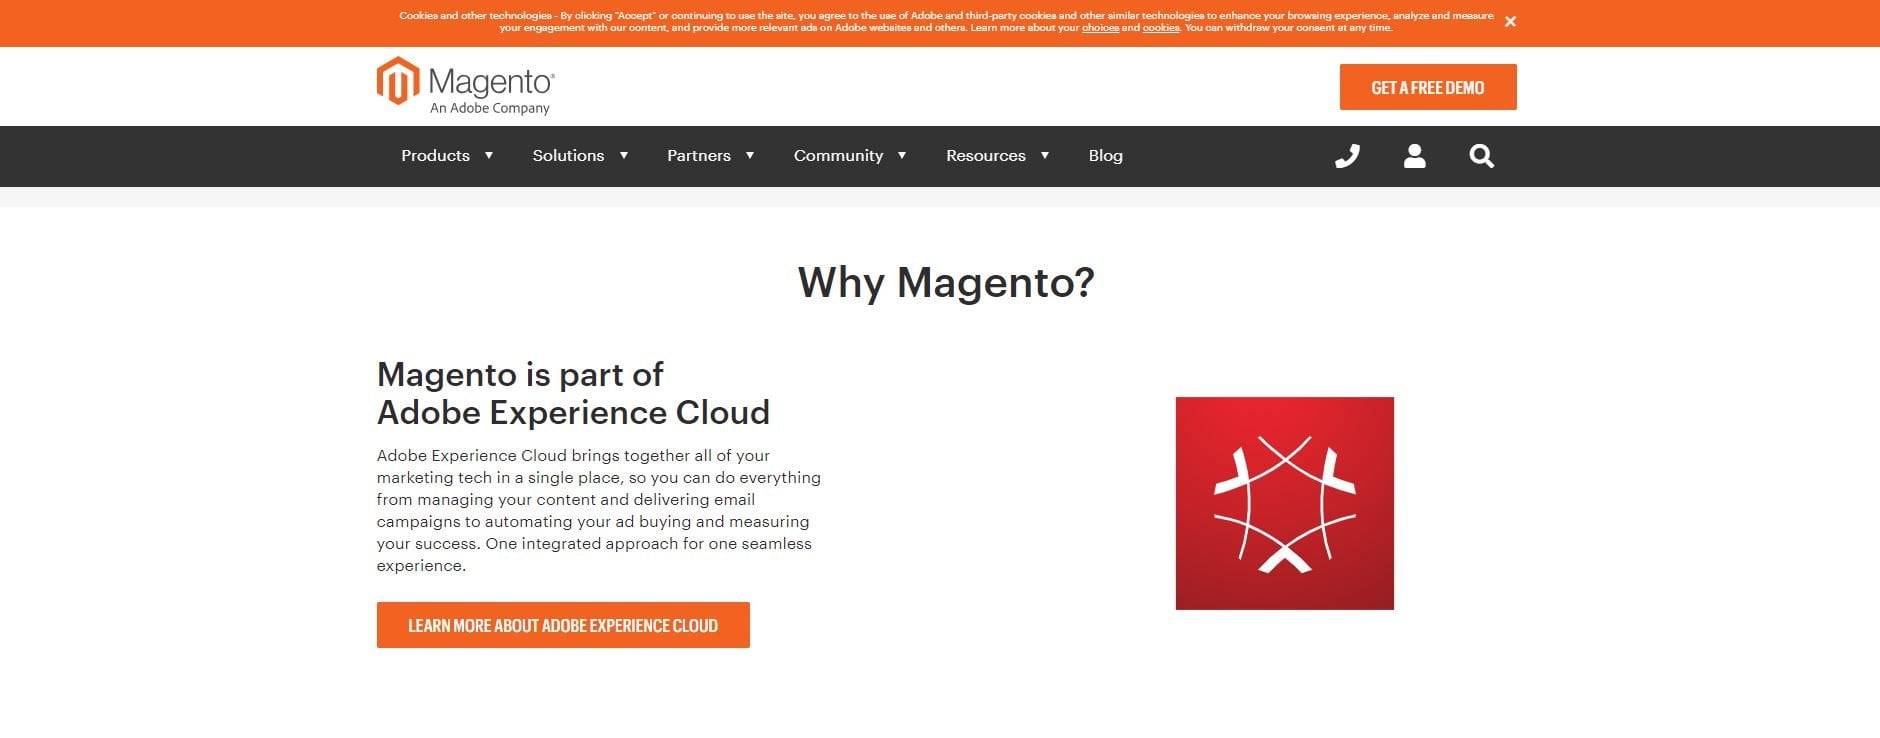 Magento about page